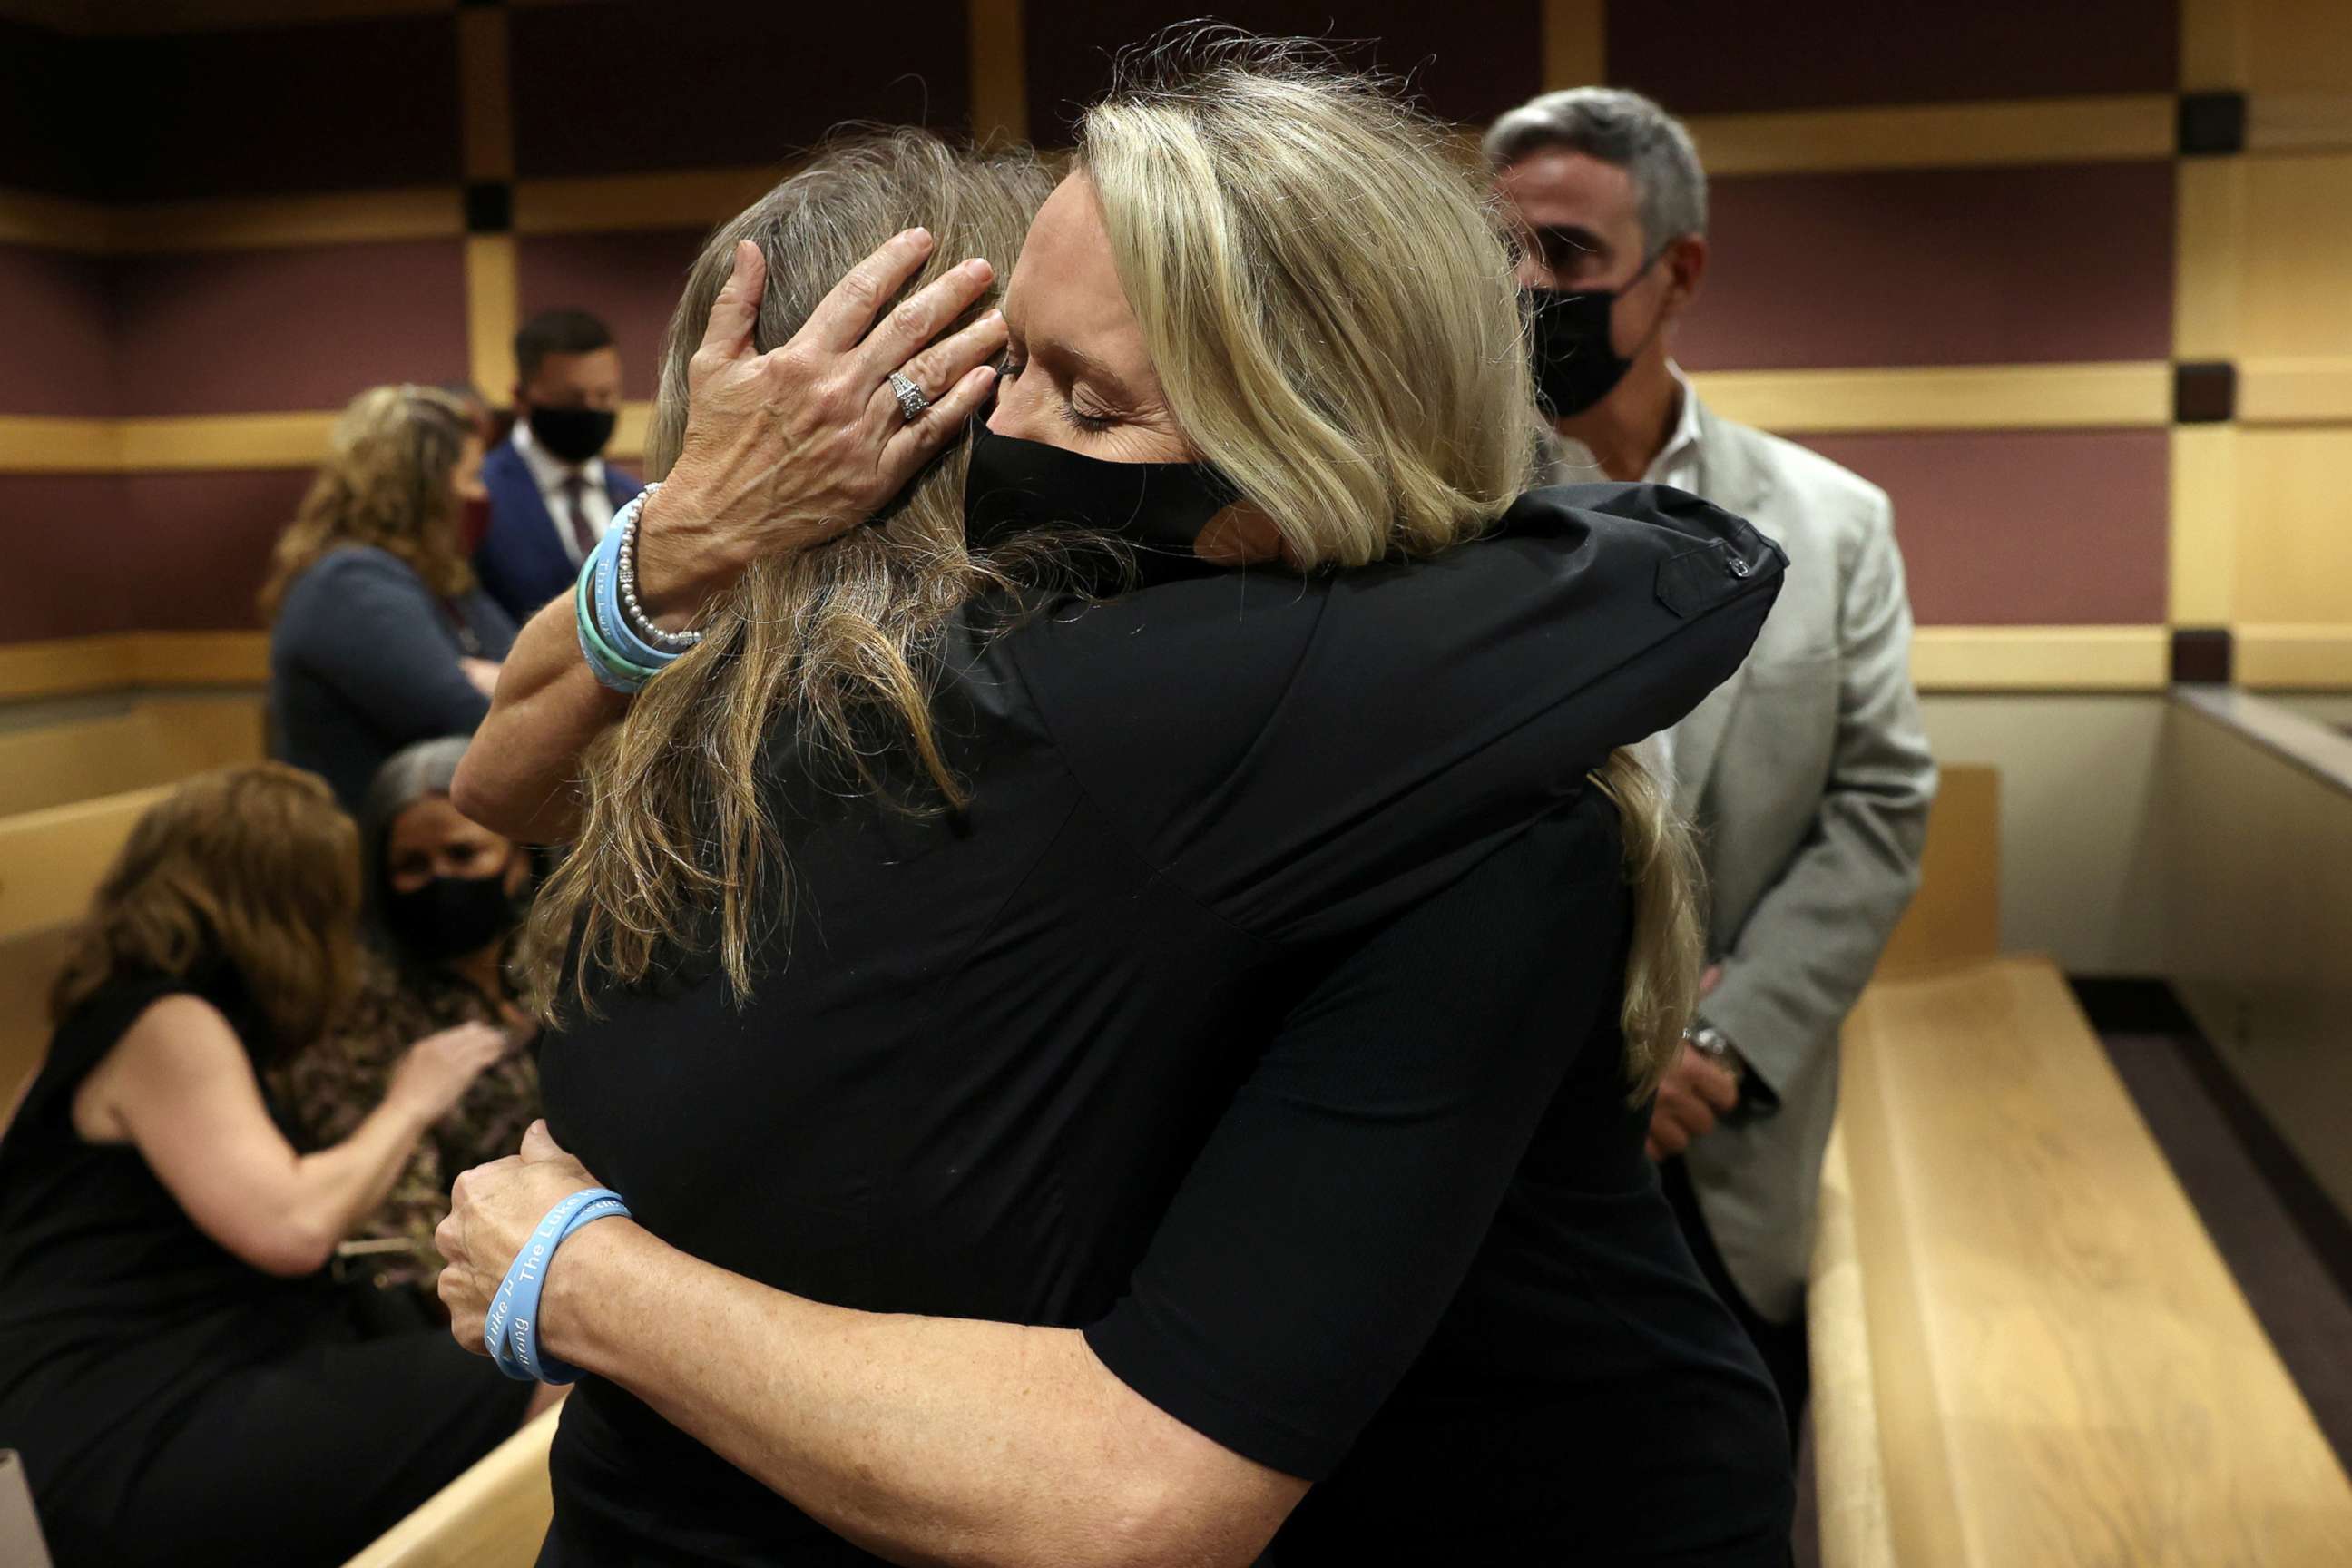 PHOTO: Gena Hoyer, mother of Luke Hoyer, hugs Debbie Hixon during a court recess following the guilty pleas of Parkland school shooter Nikolas Cruz at the Broward County Courthouse in Fort Lauderdale, Fla., Oct. 20, 2021. 